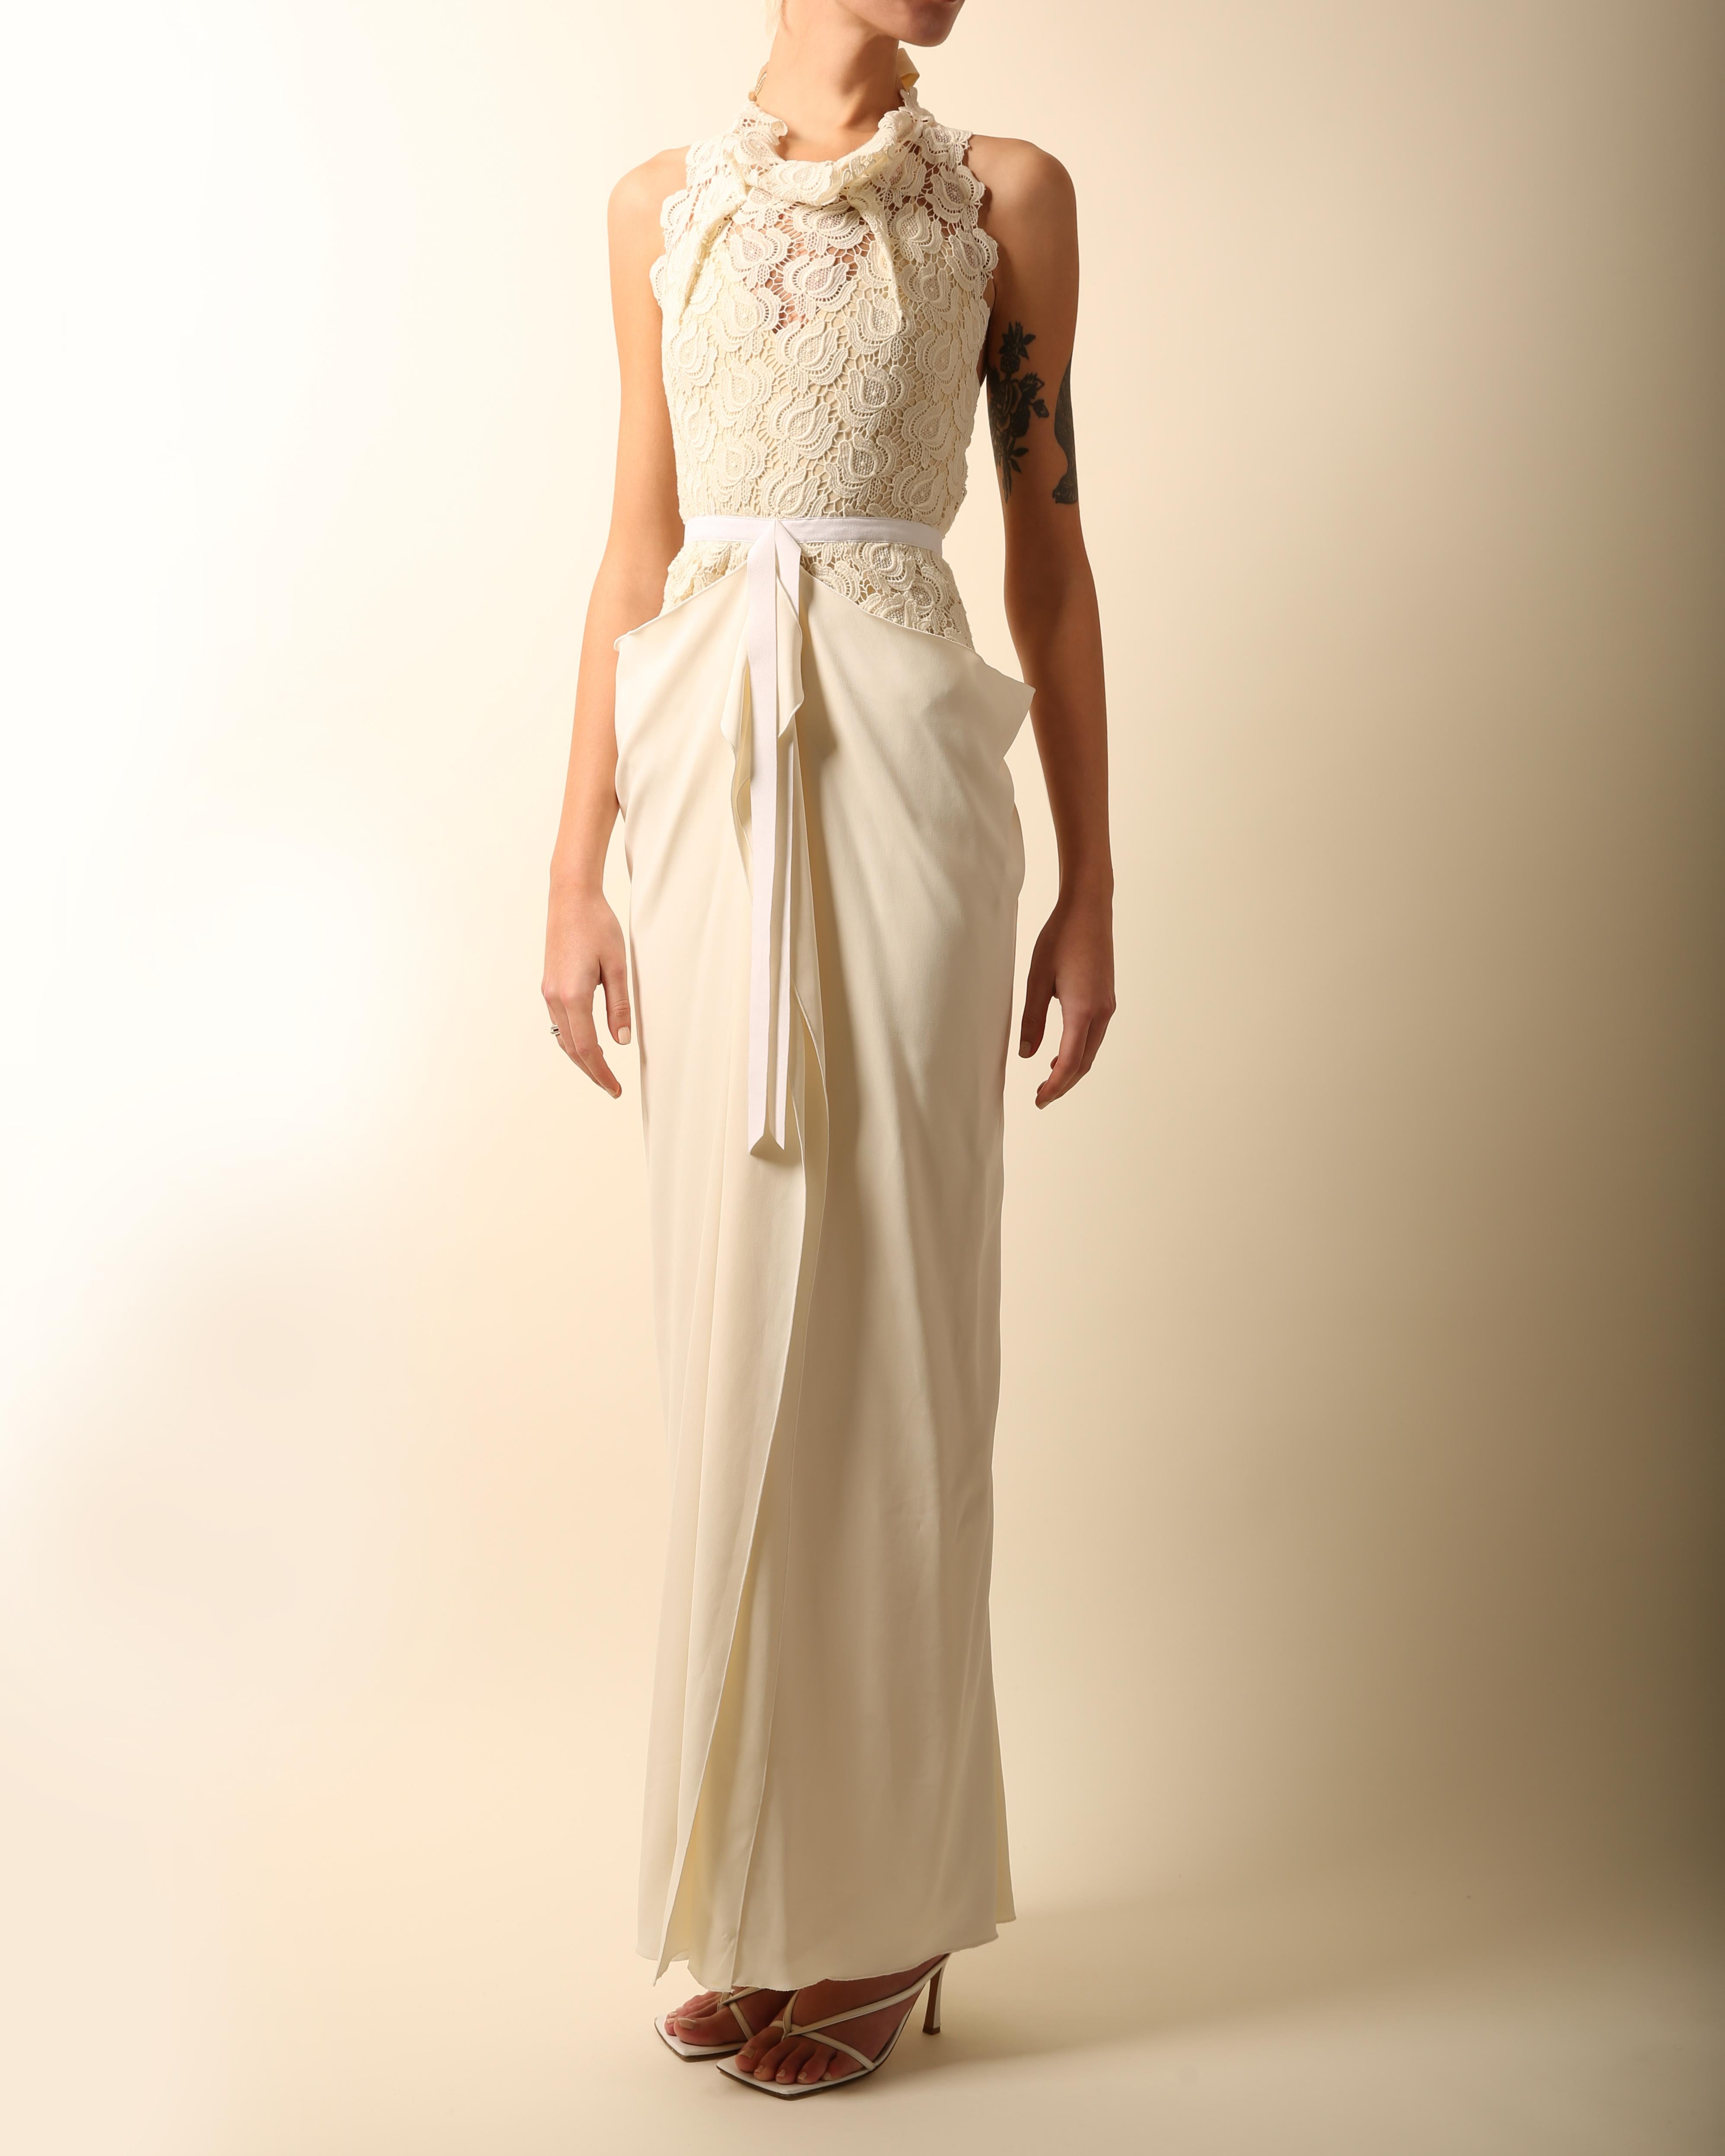 Roland Mouret
Ivory & cream full length dress with a beautiful lace upper
Draping neckline
Cinched in waist tied with a white velvet ribbon
Ties at the back of the neck and waist with long silk cream ties
Cut out back
Silk lining
Exposed back zip